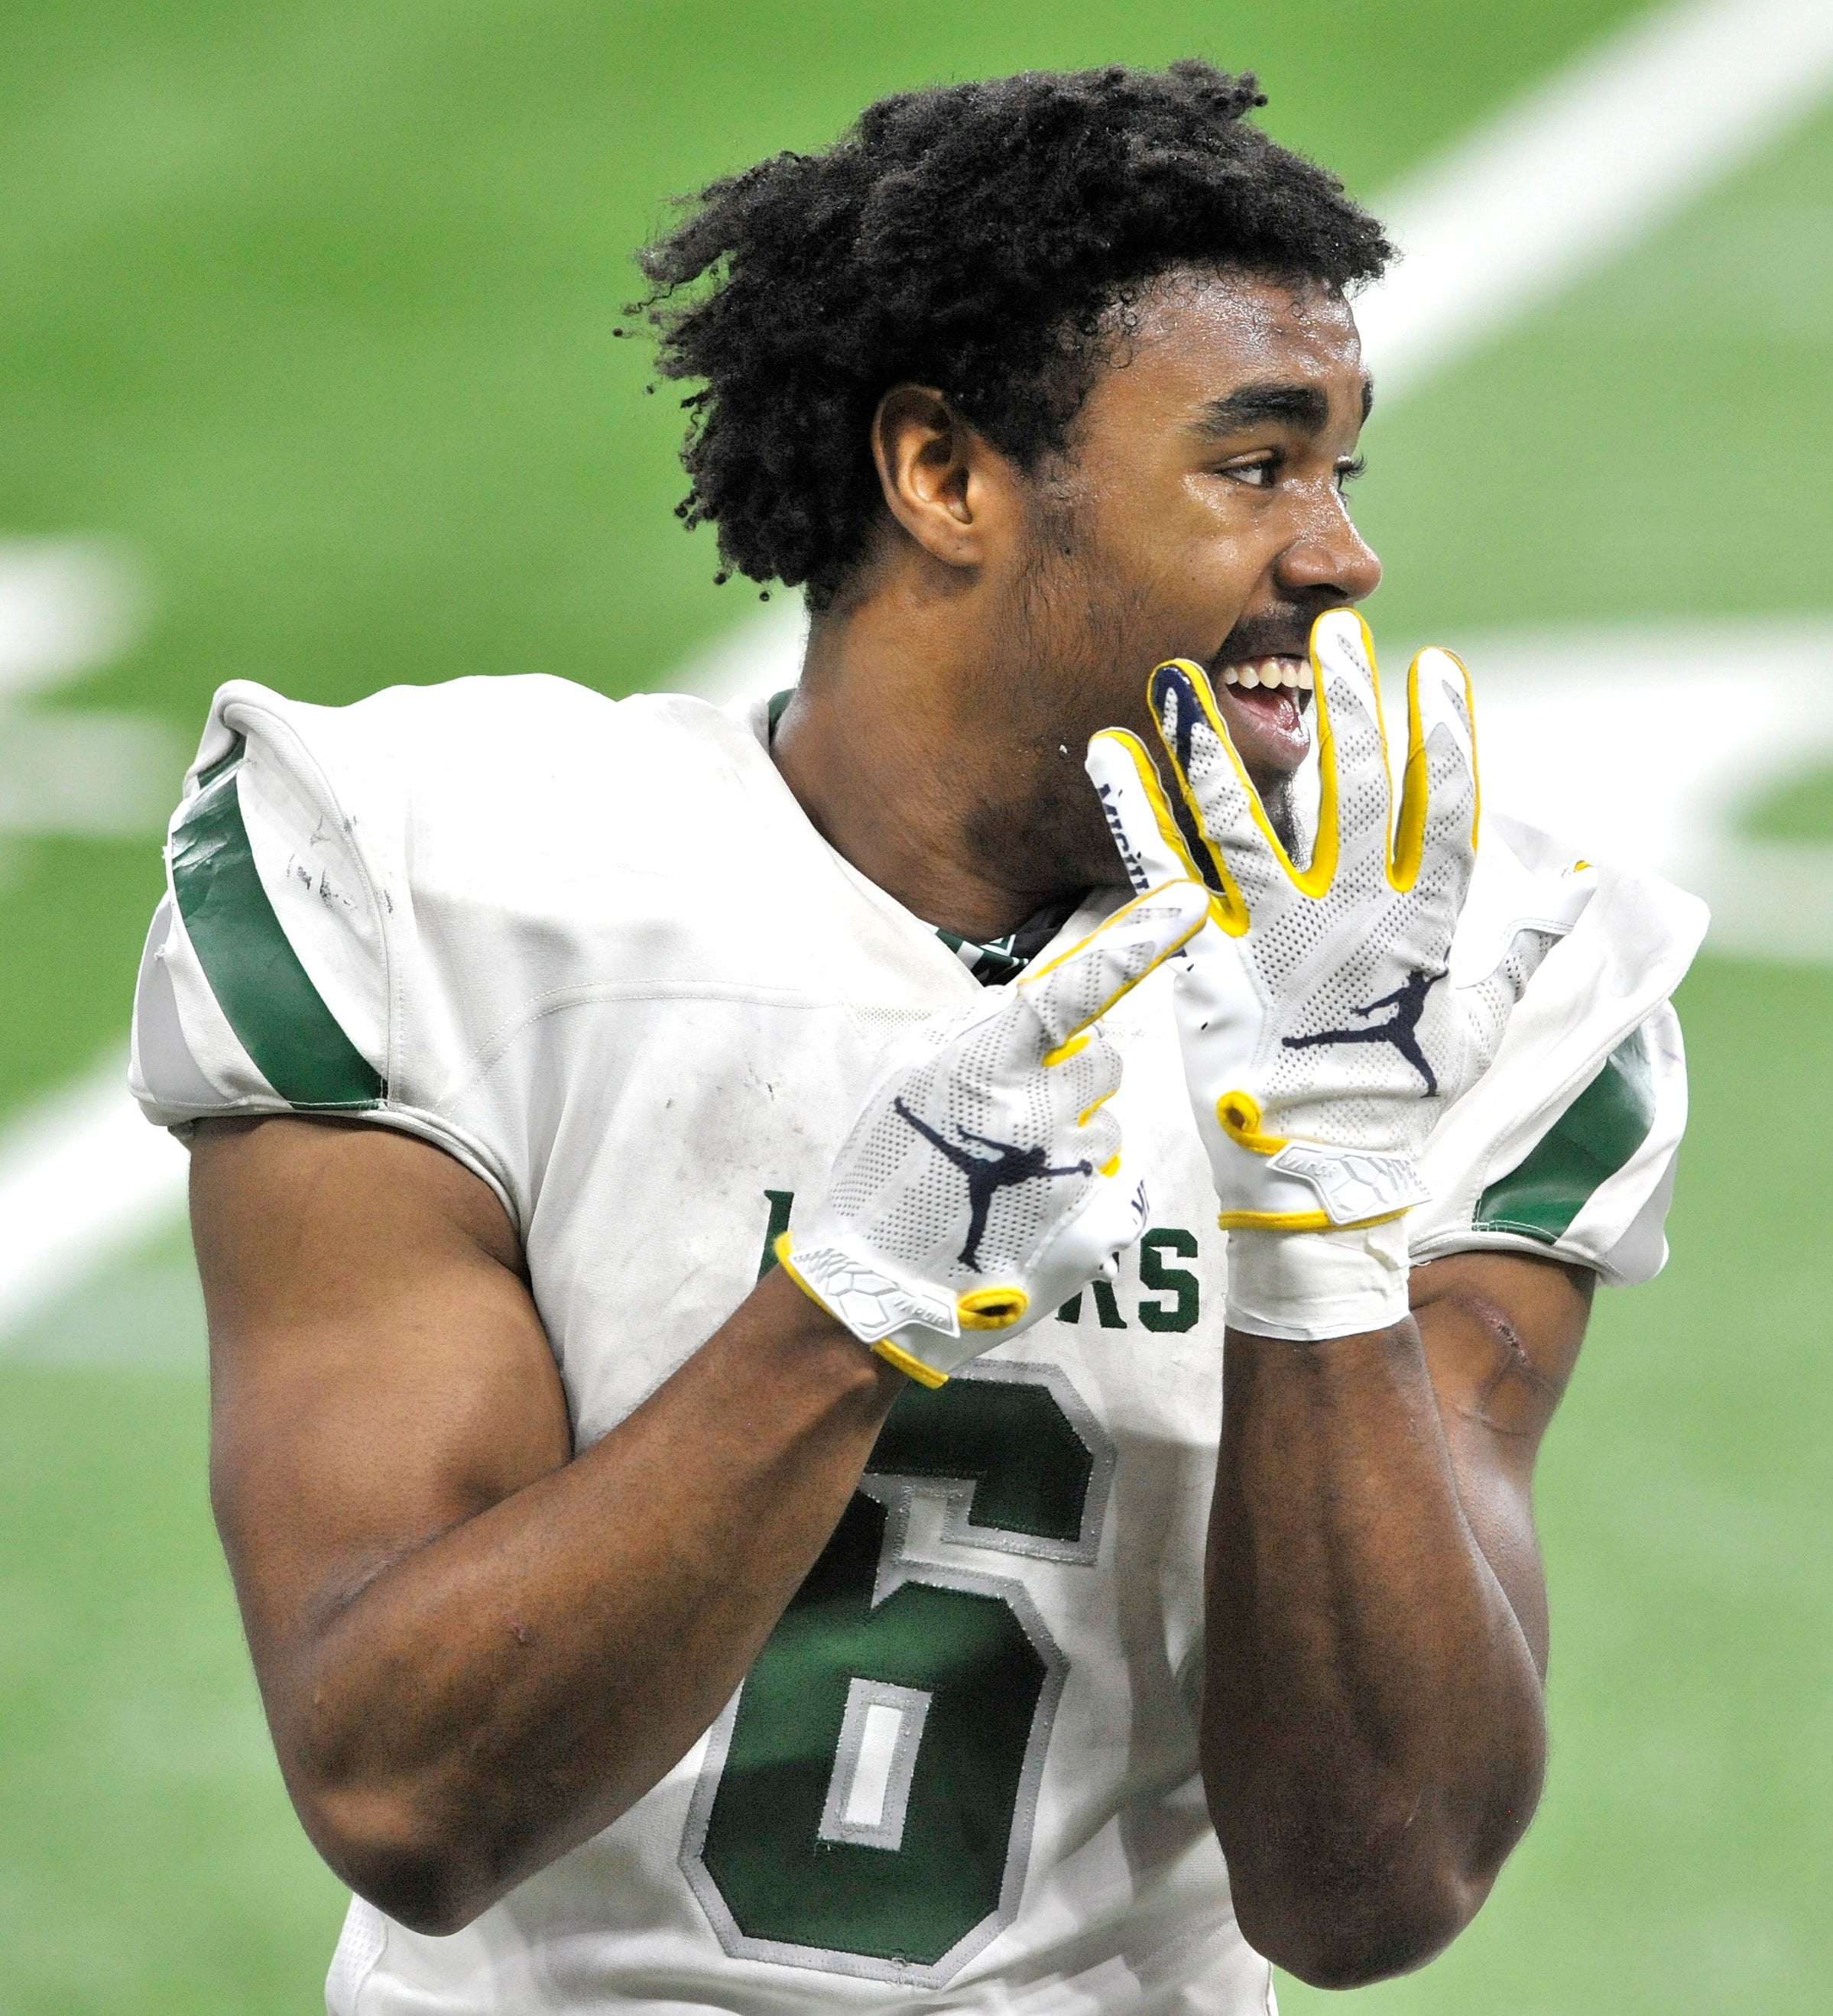 After scoring another touchdown and being taken out of the game at the end of the third quarter, West Bloomfield's Donovan Edwards (6) signals this is the finger is where he will wear his state championship ring.